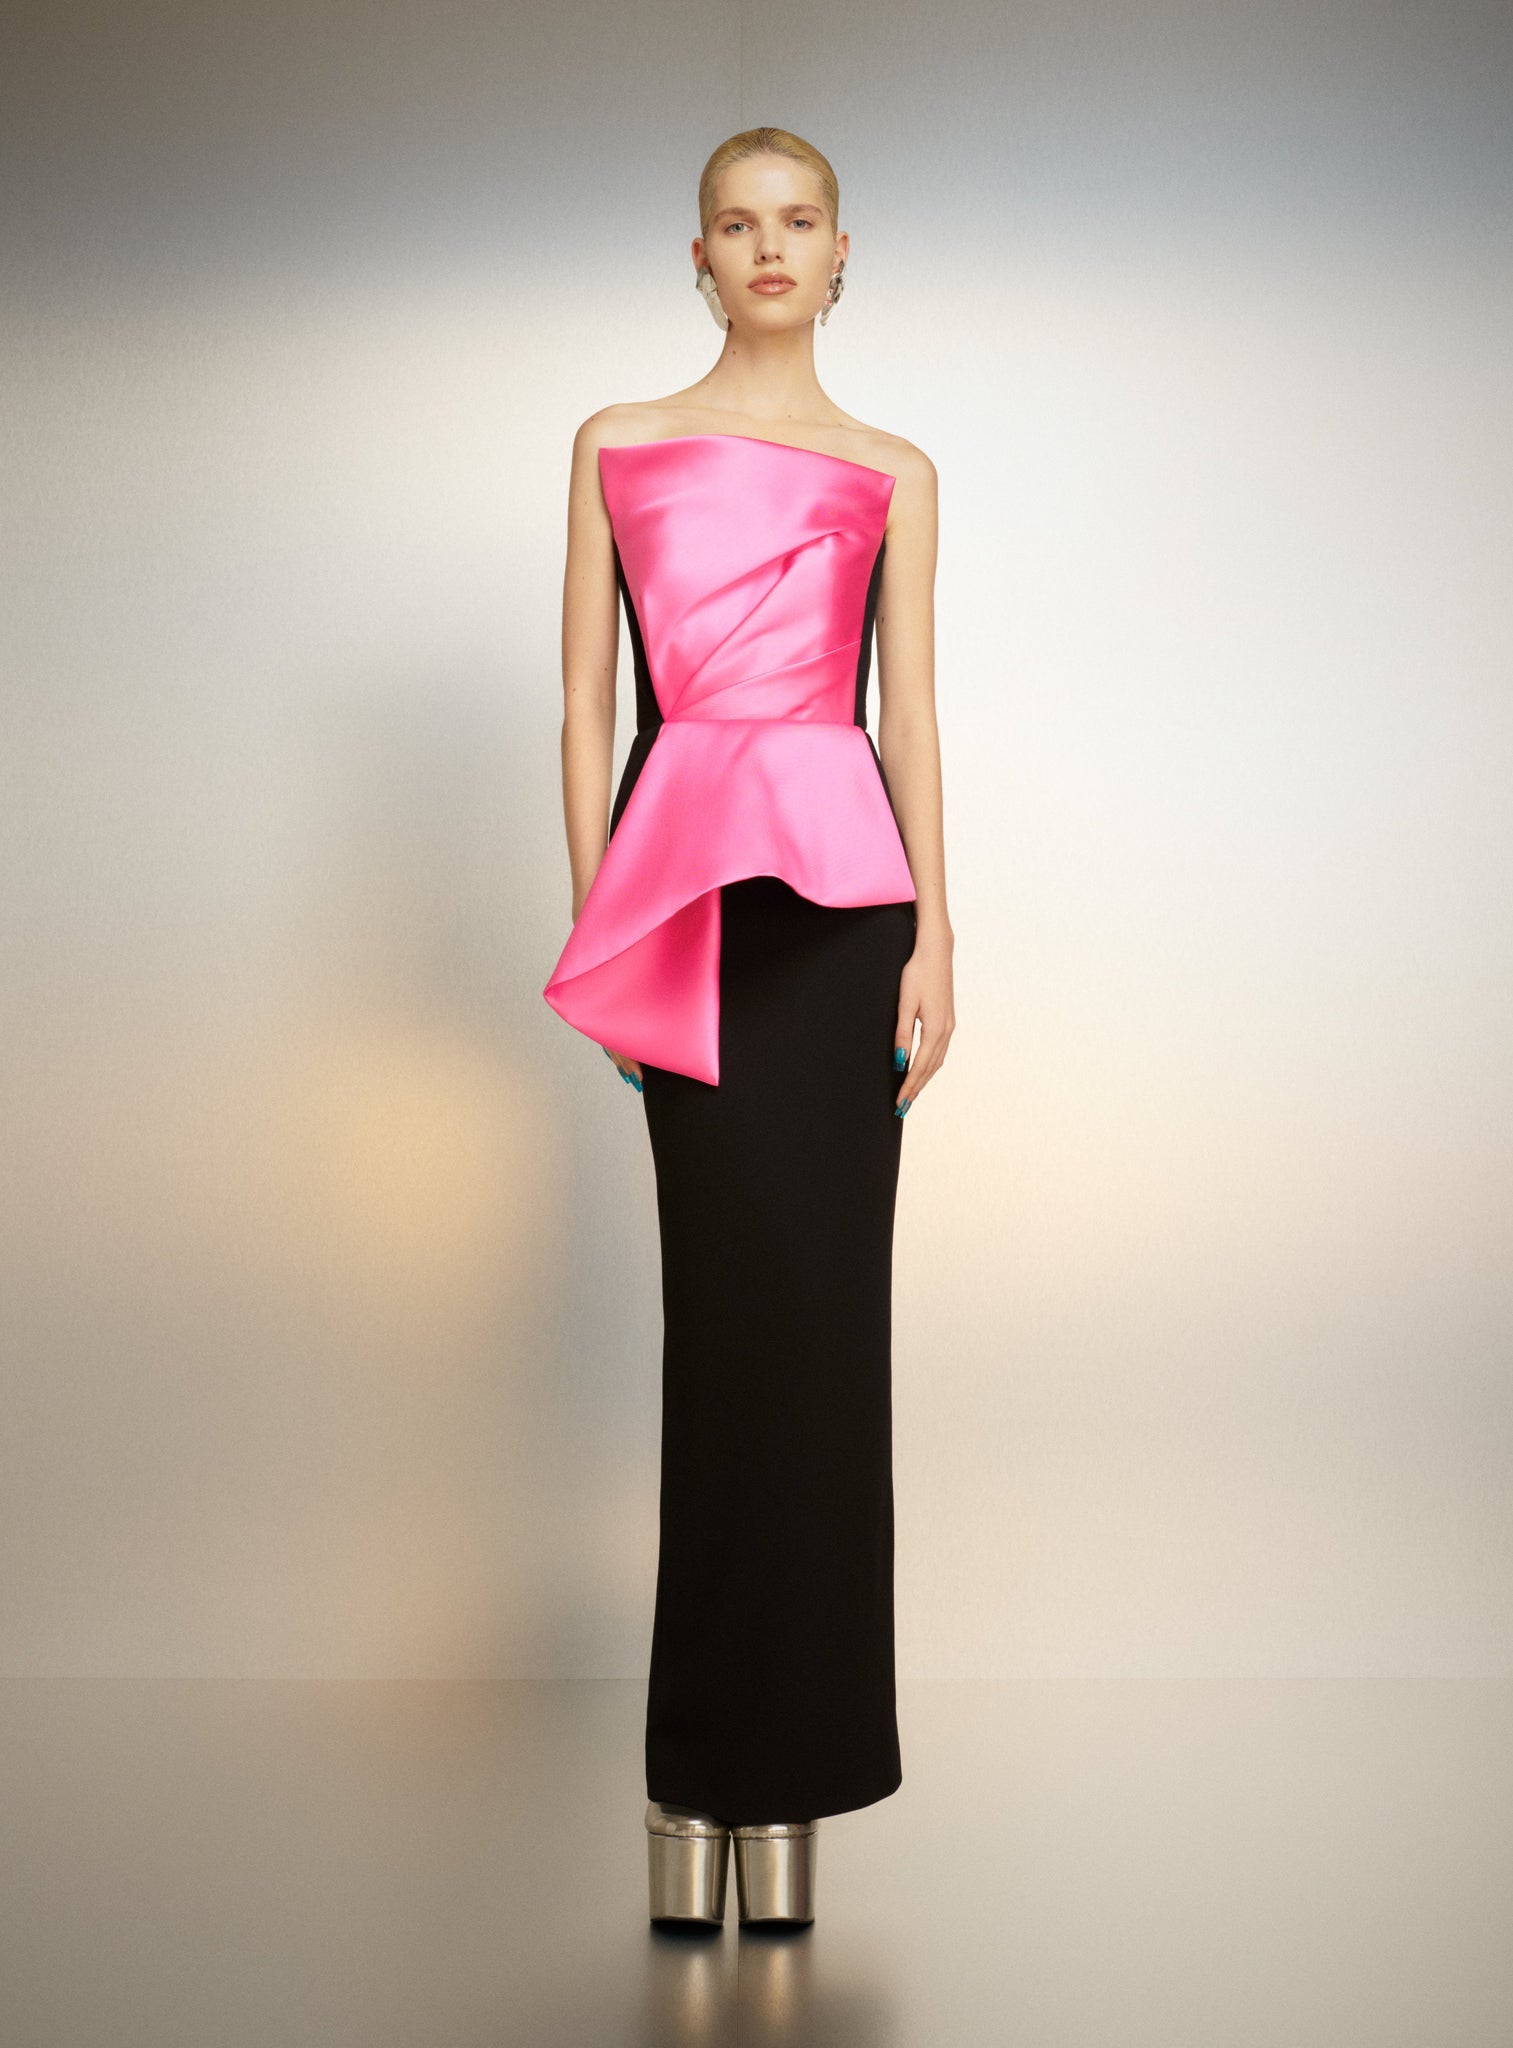 The Zuri Maxi Dress in Pink and Black